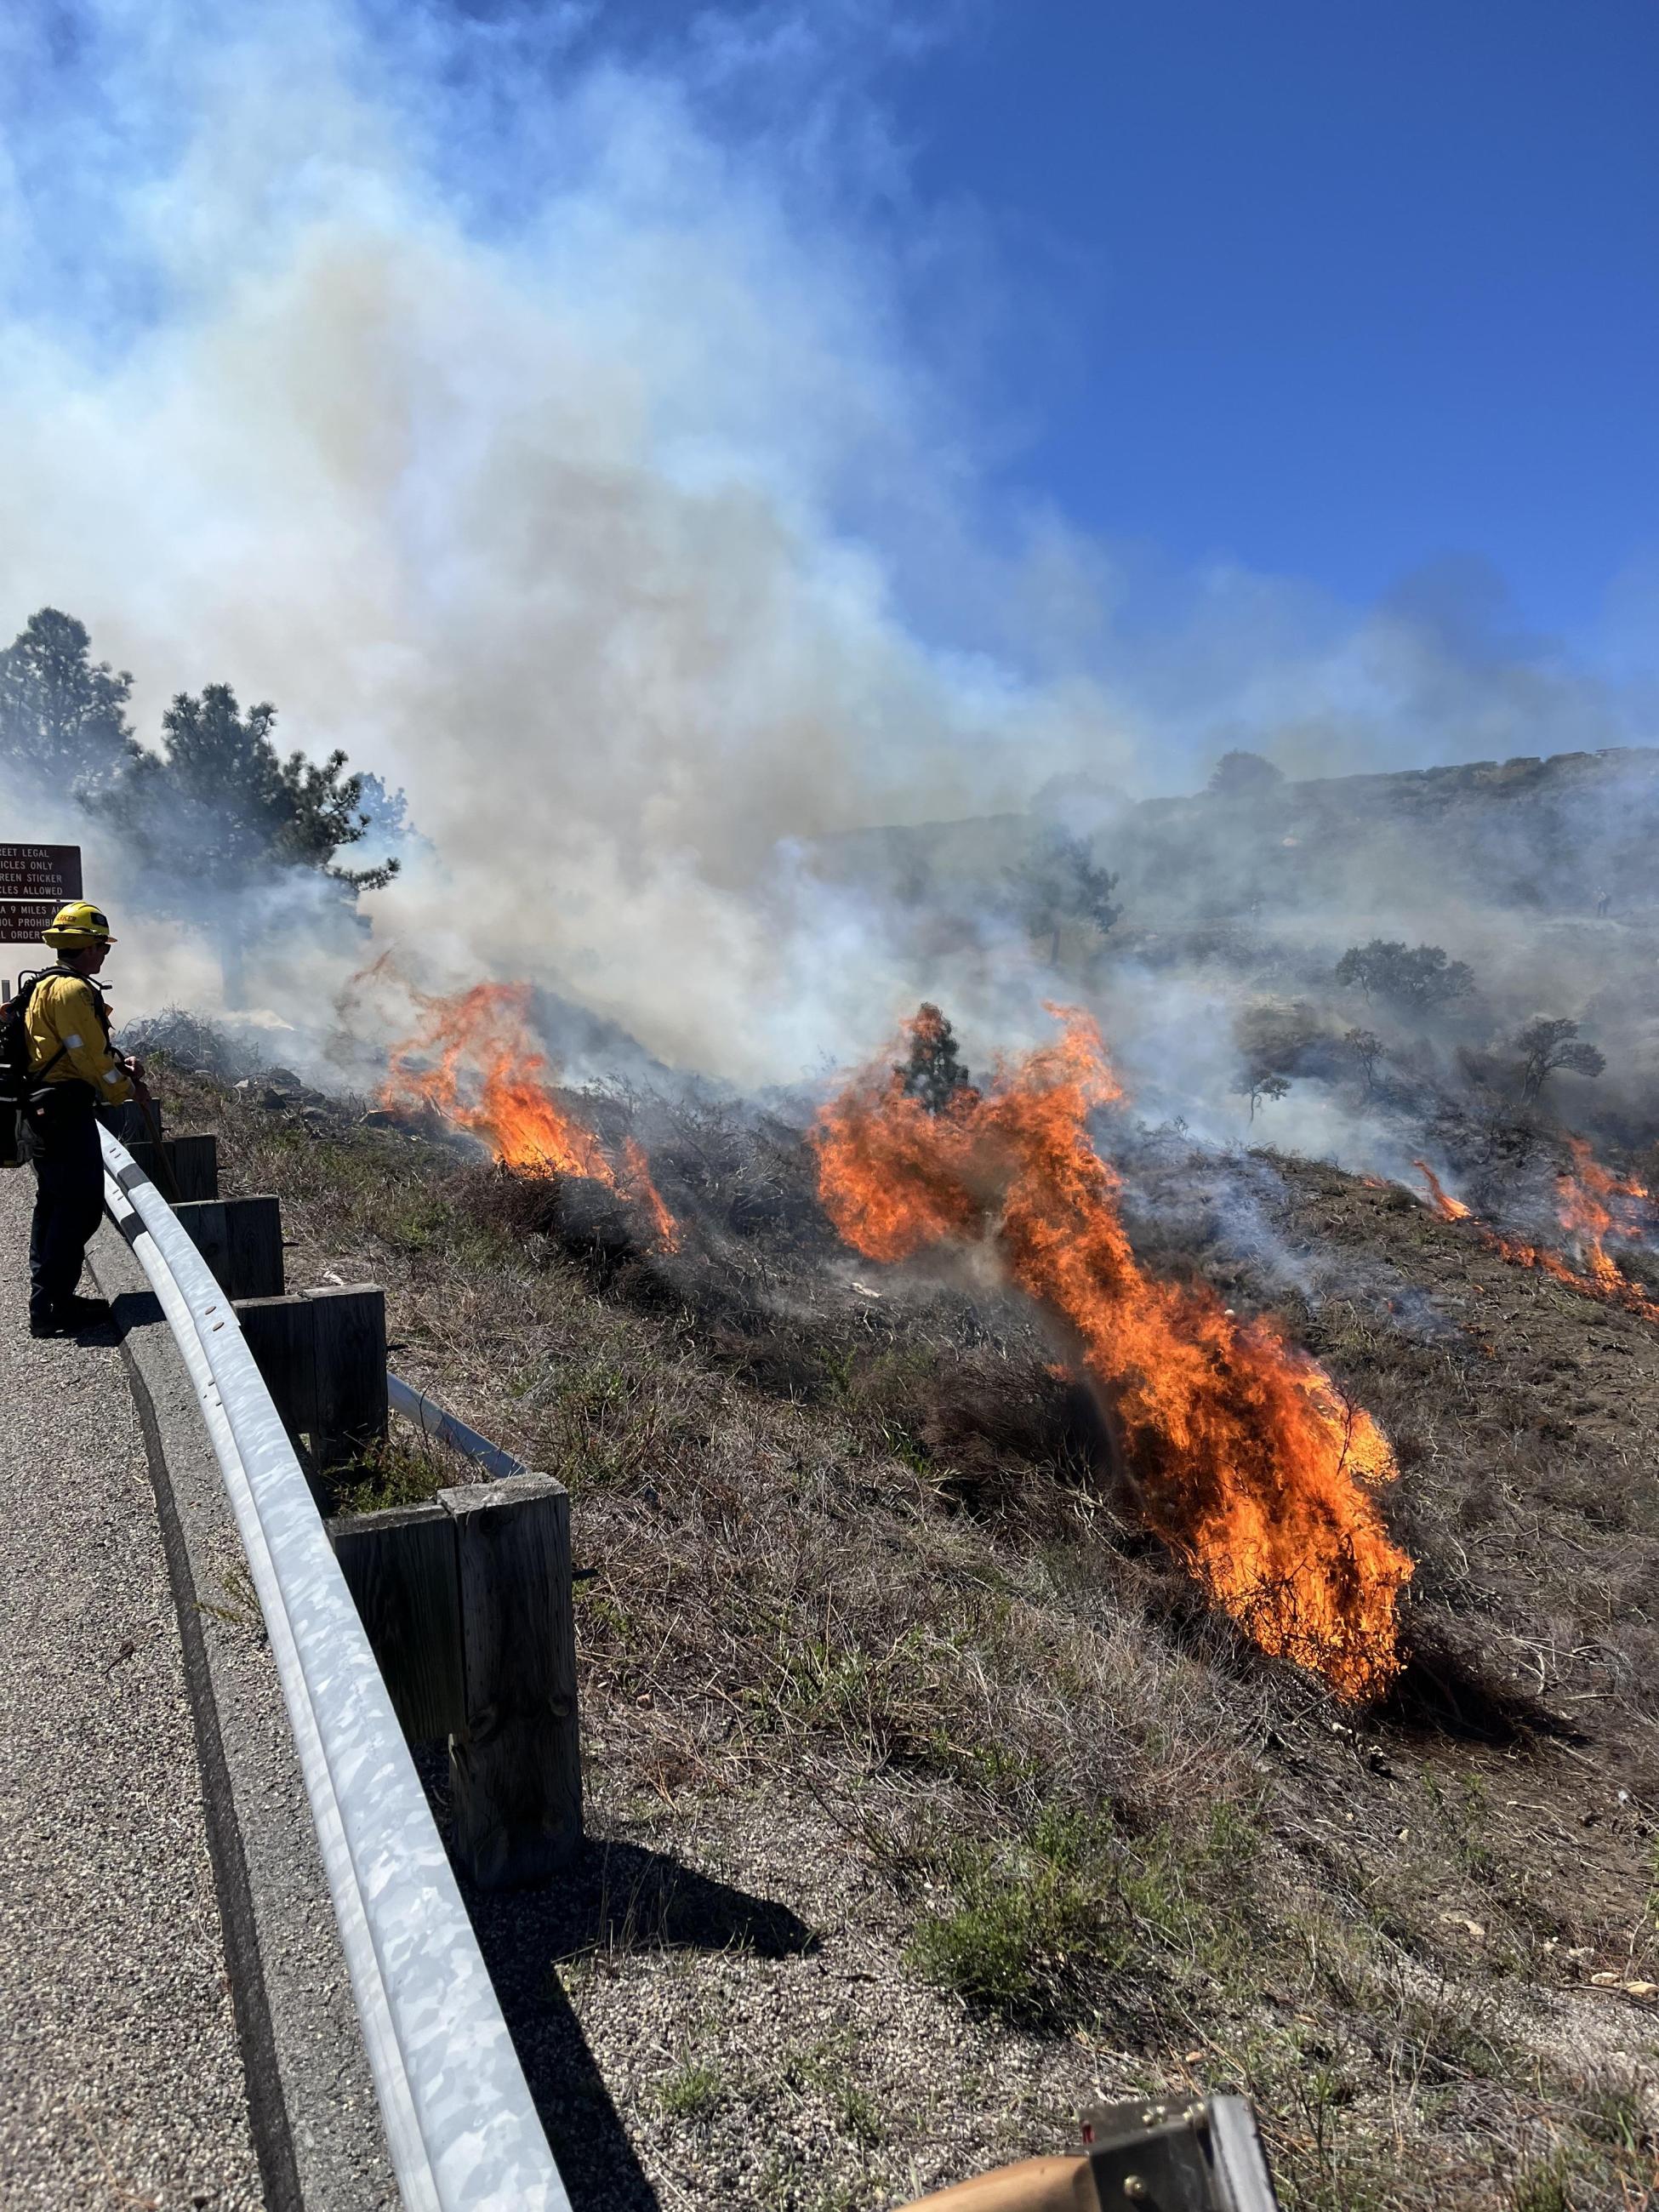 Picture shows firefighter standing on the side of a road in front of a guard rail. The firefighter is looking down the hill side that has flames and smoke in the background.